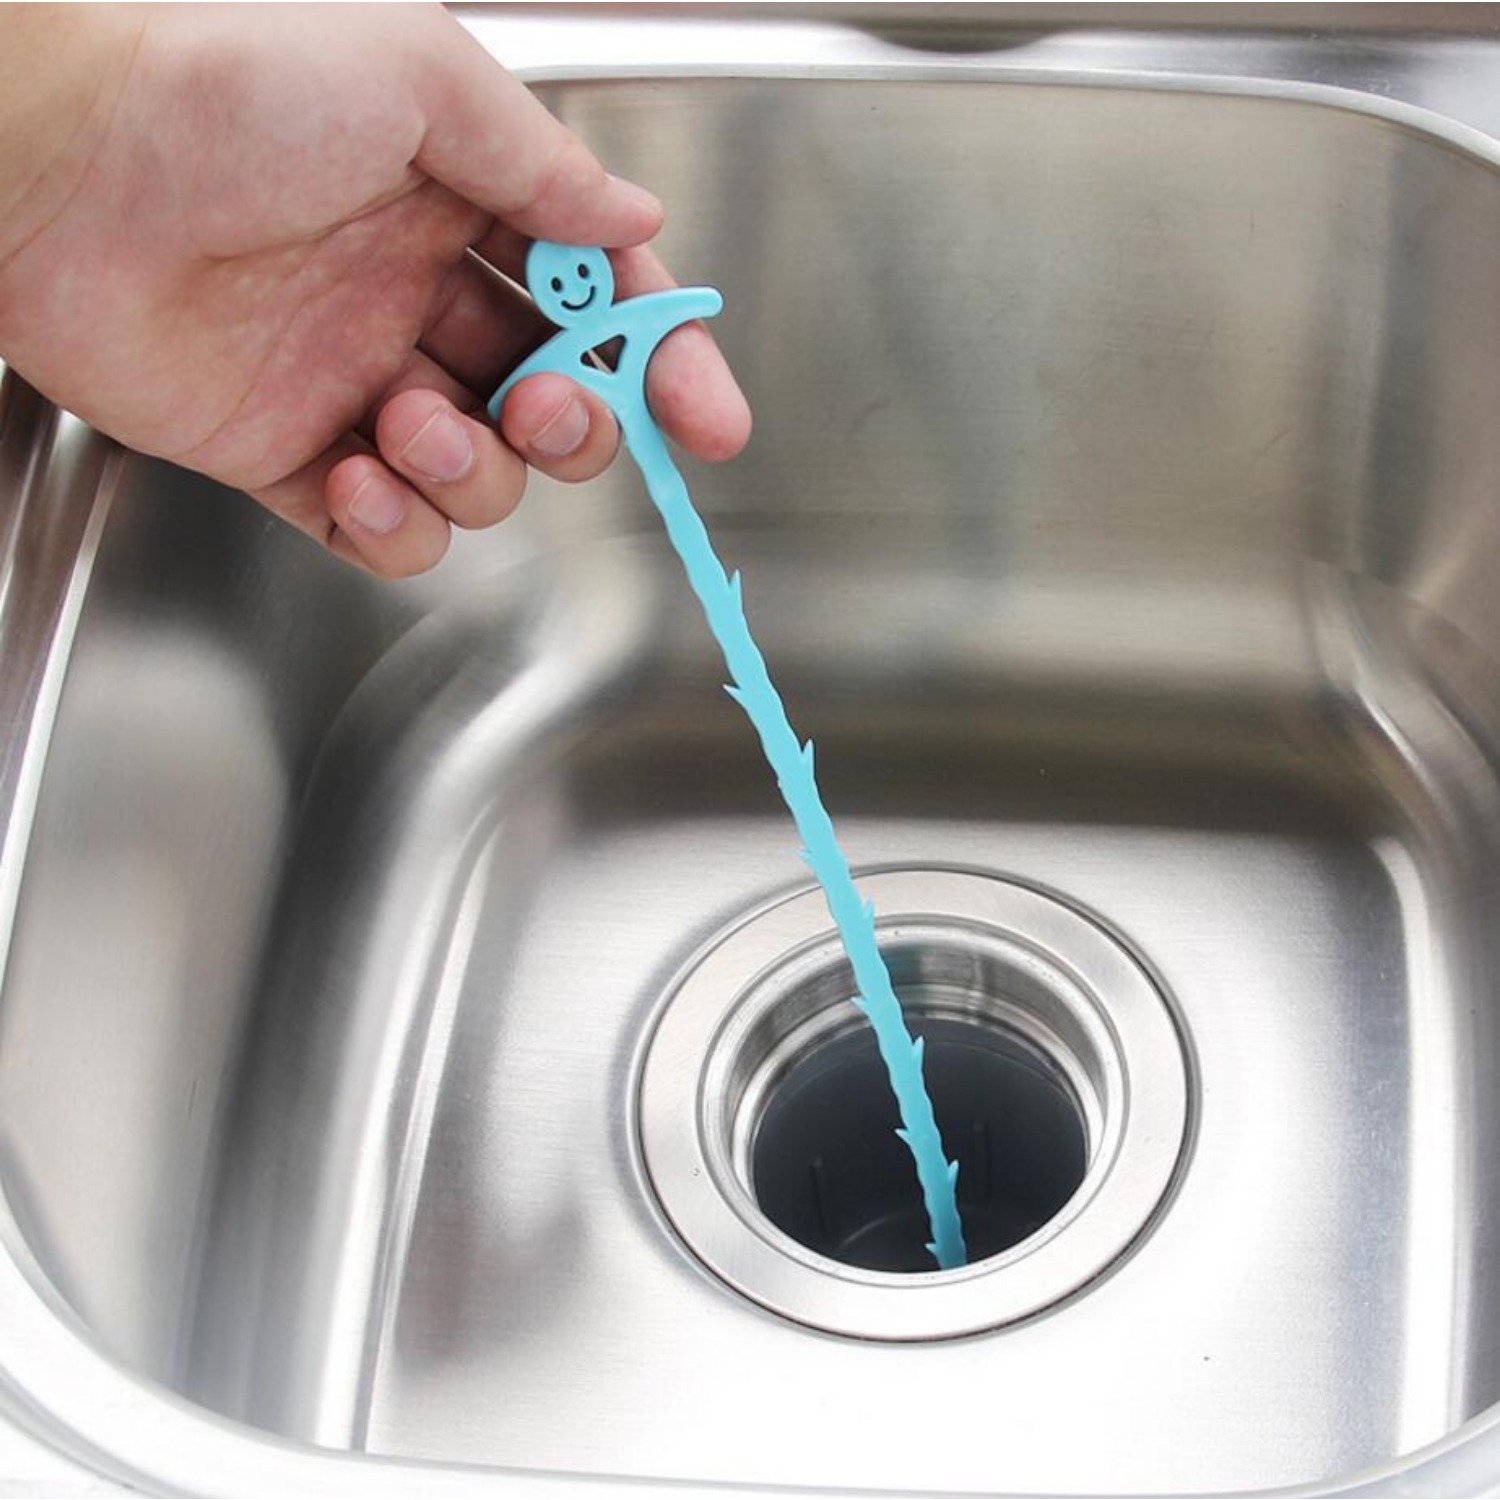 New Arrival,Drain / Hair Removal Tool Drain Dredge Pipe Sewer Filter  Cleaner Hook Drains,Kitchen Accessories,Free Shipping.